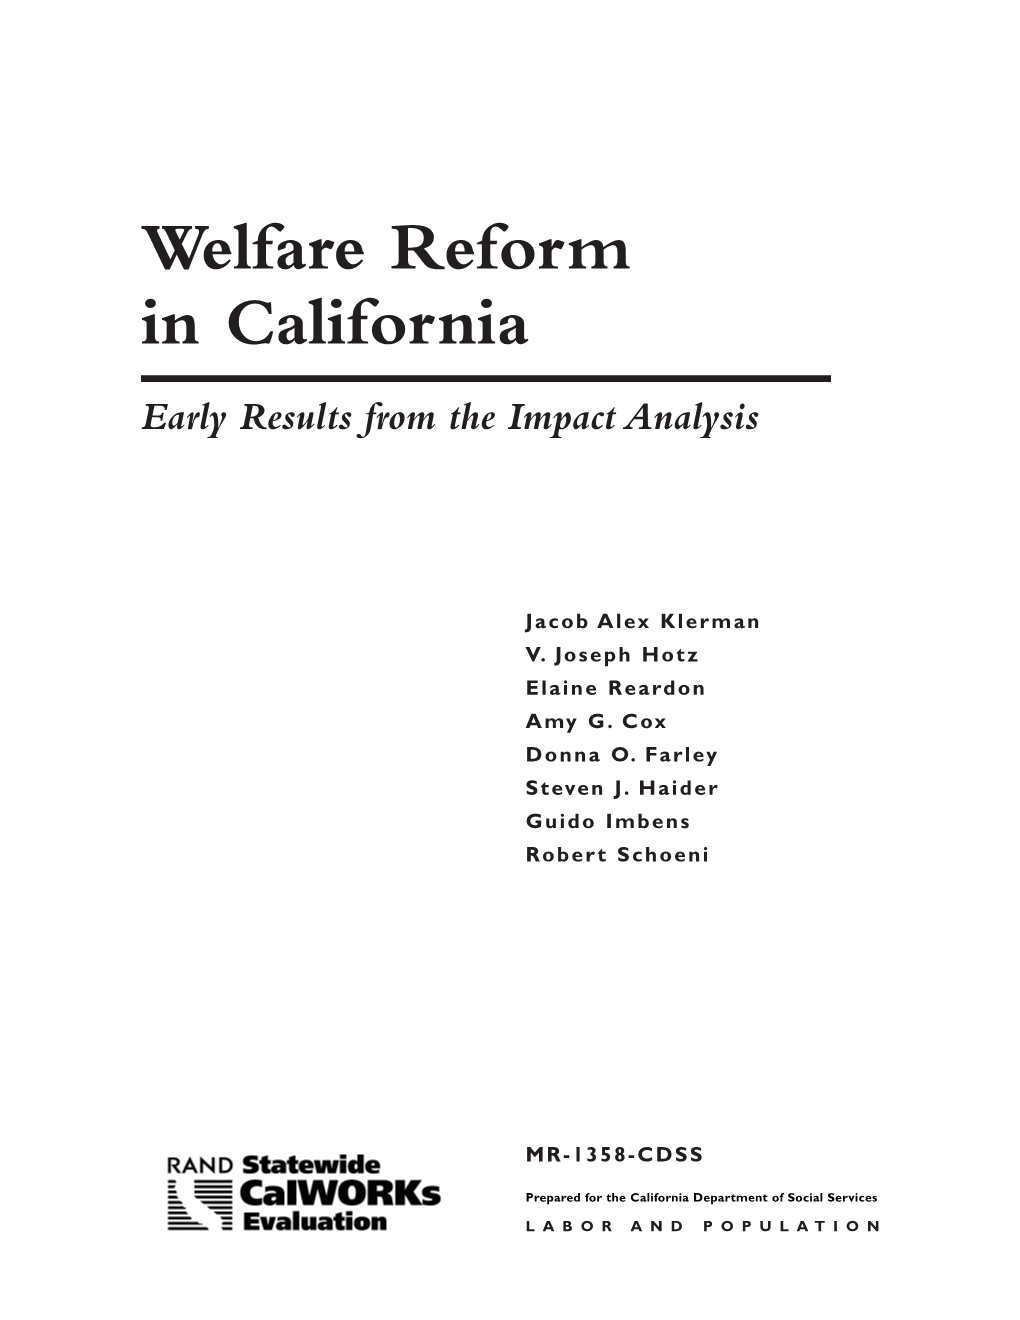 Welfare Reform in California: Early Results from the Impact Analysis, Executive Summary (MR-1358/1-CDSS)